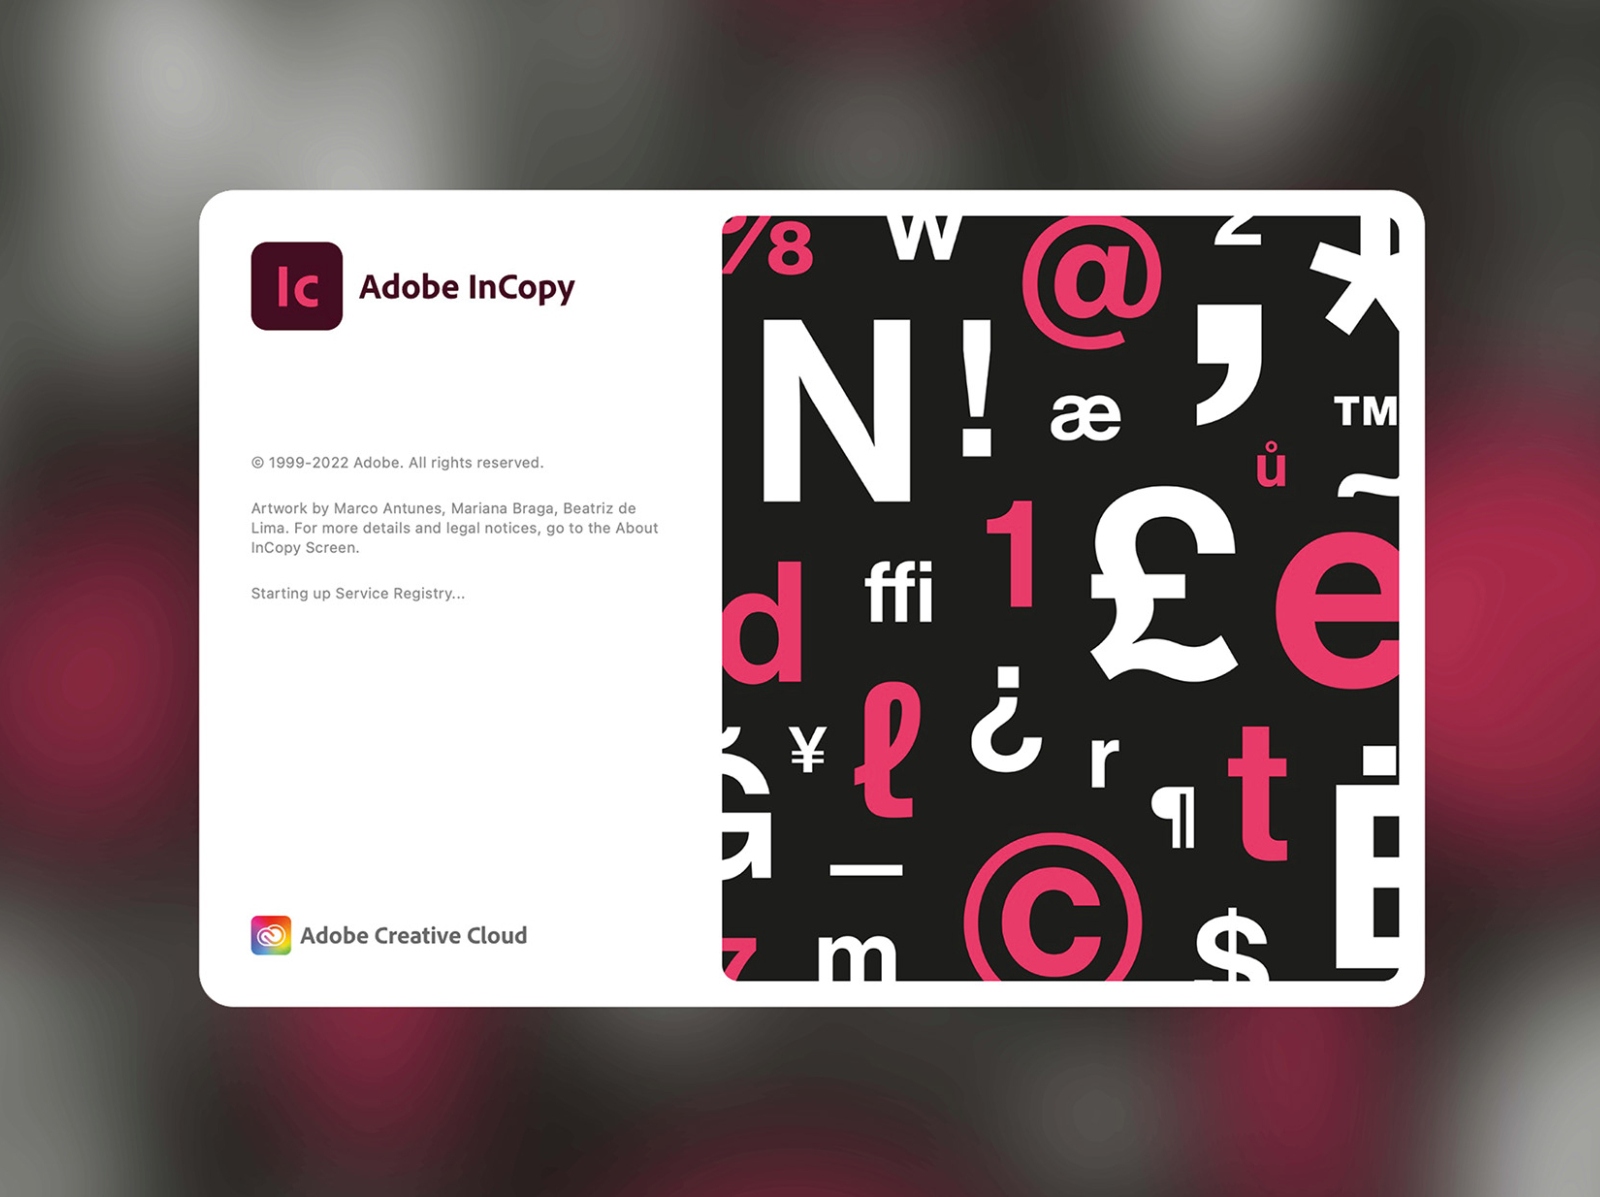 download the new for android Adobe InCopy 2023 v18.4.0.56